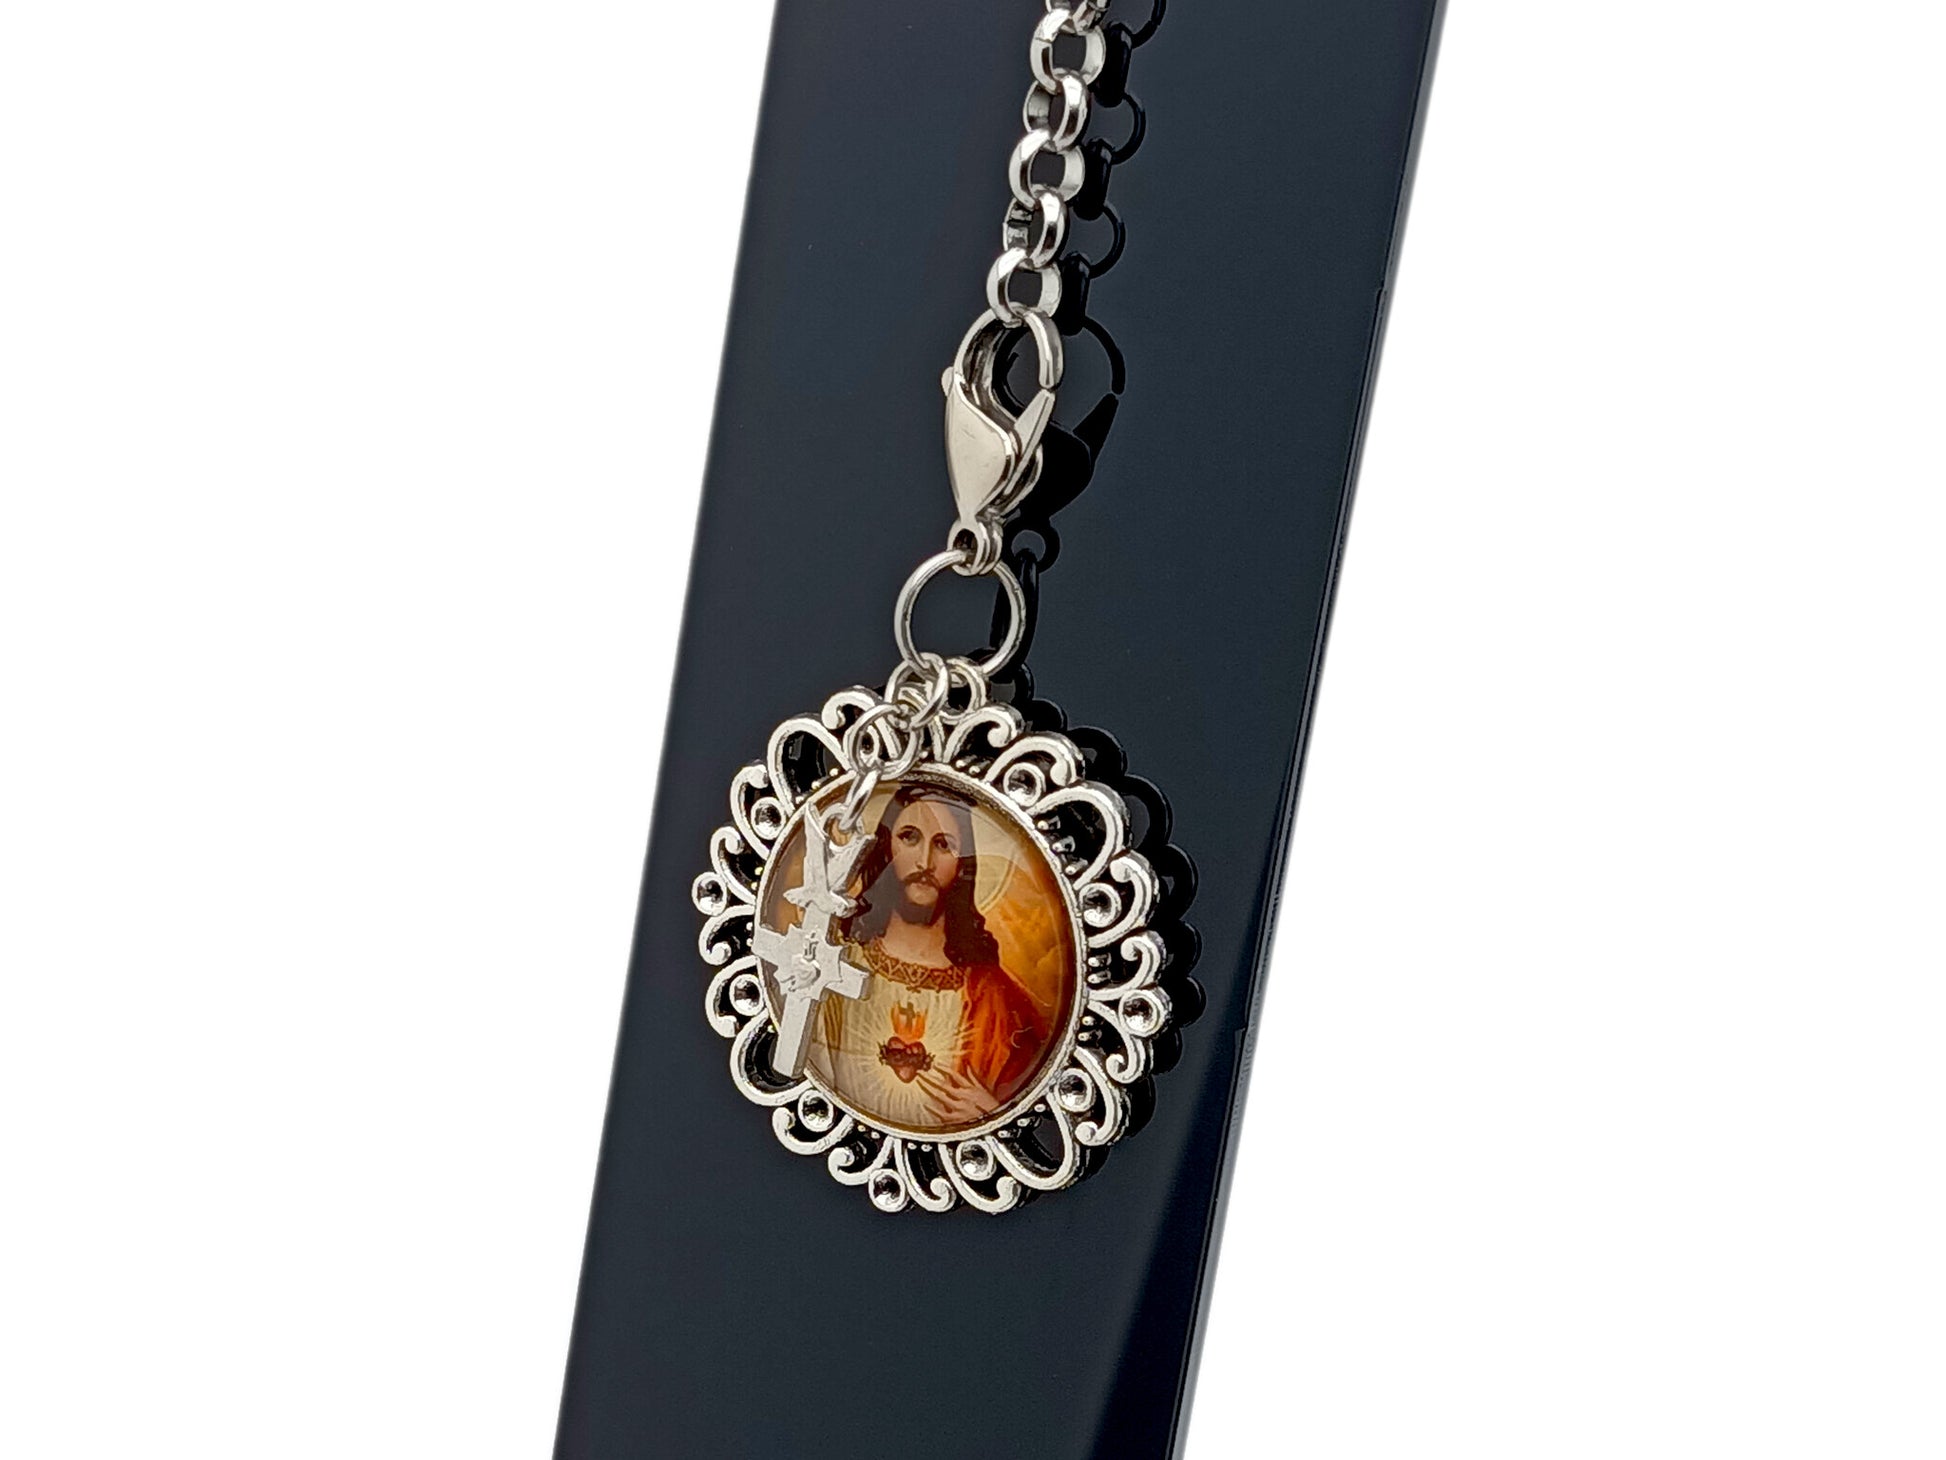 Sacred Heart of Jesus unique rosary beads domed picture medal purse clip key chain.